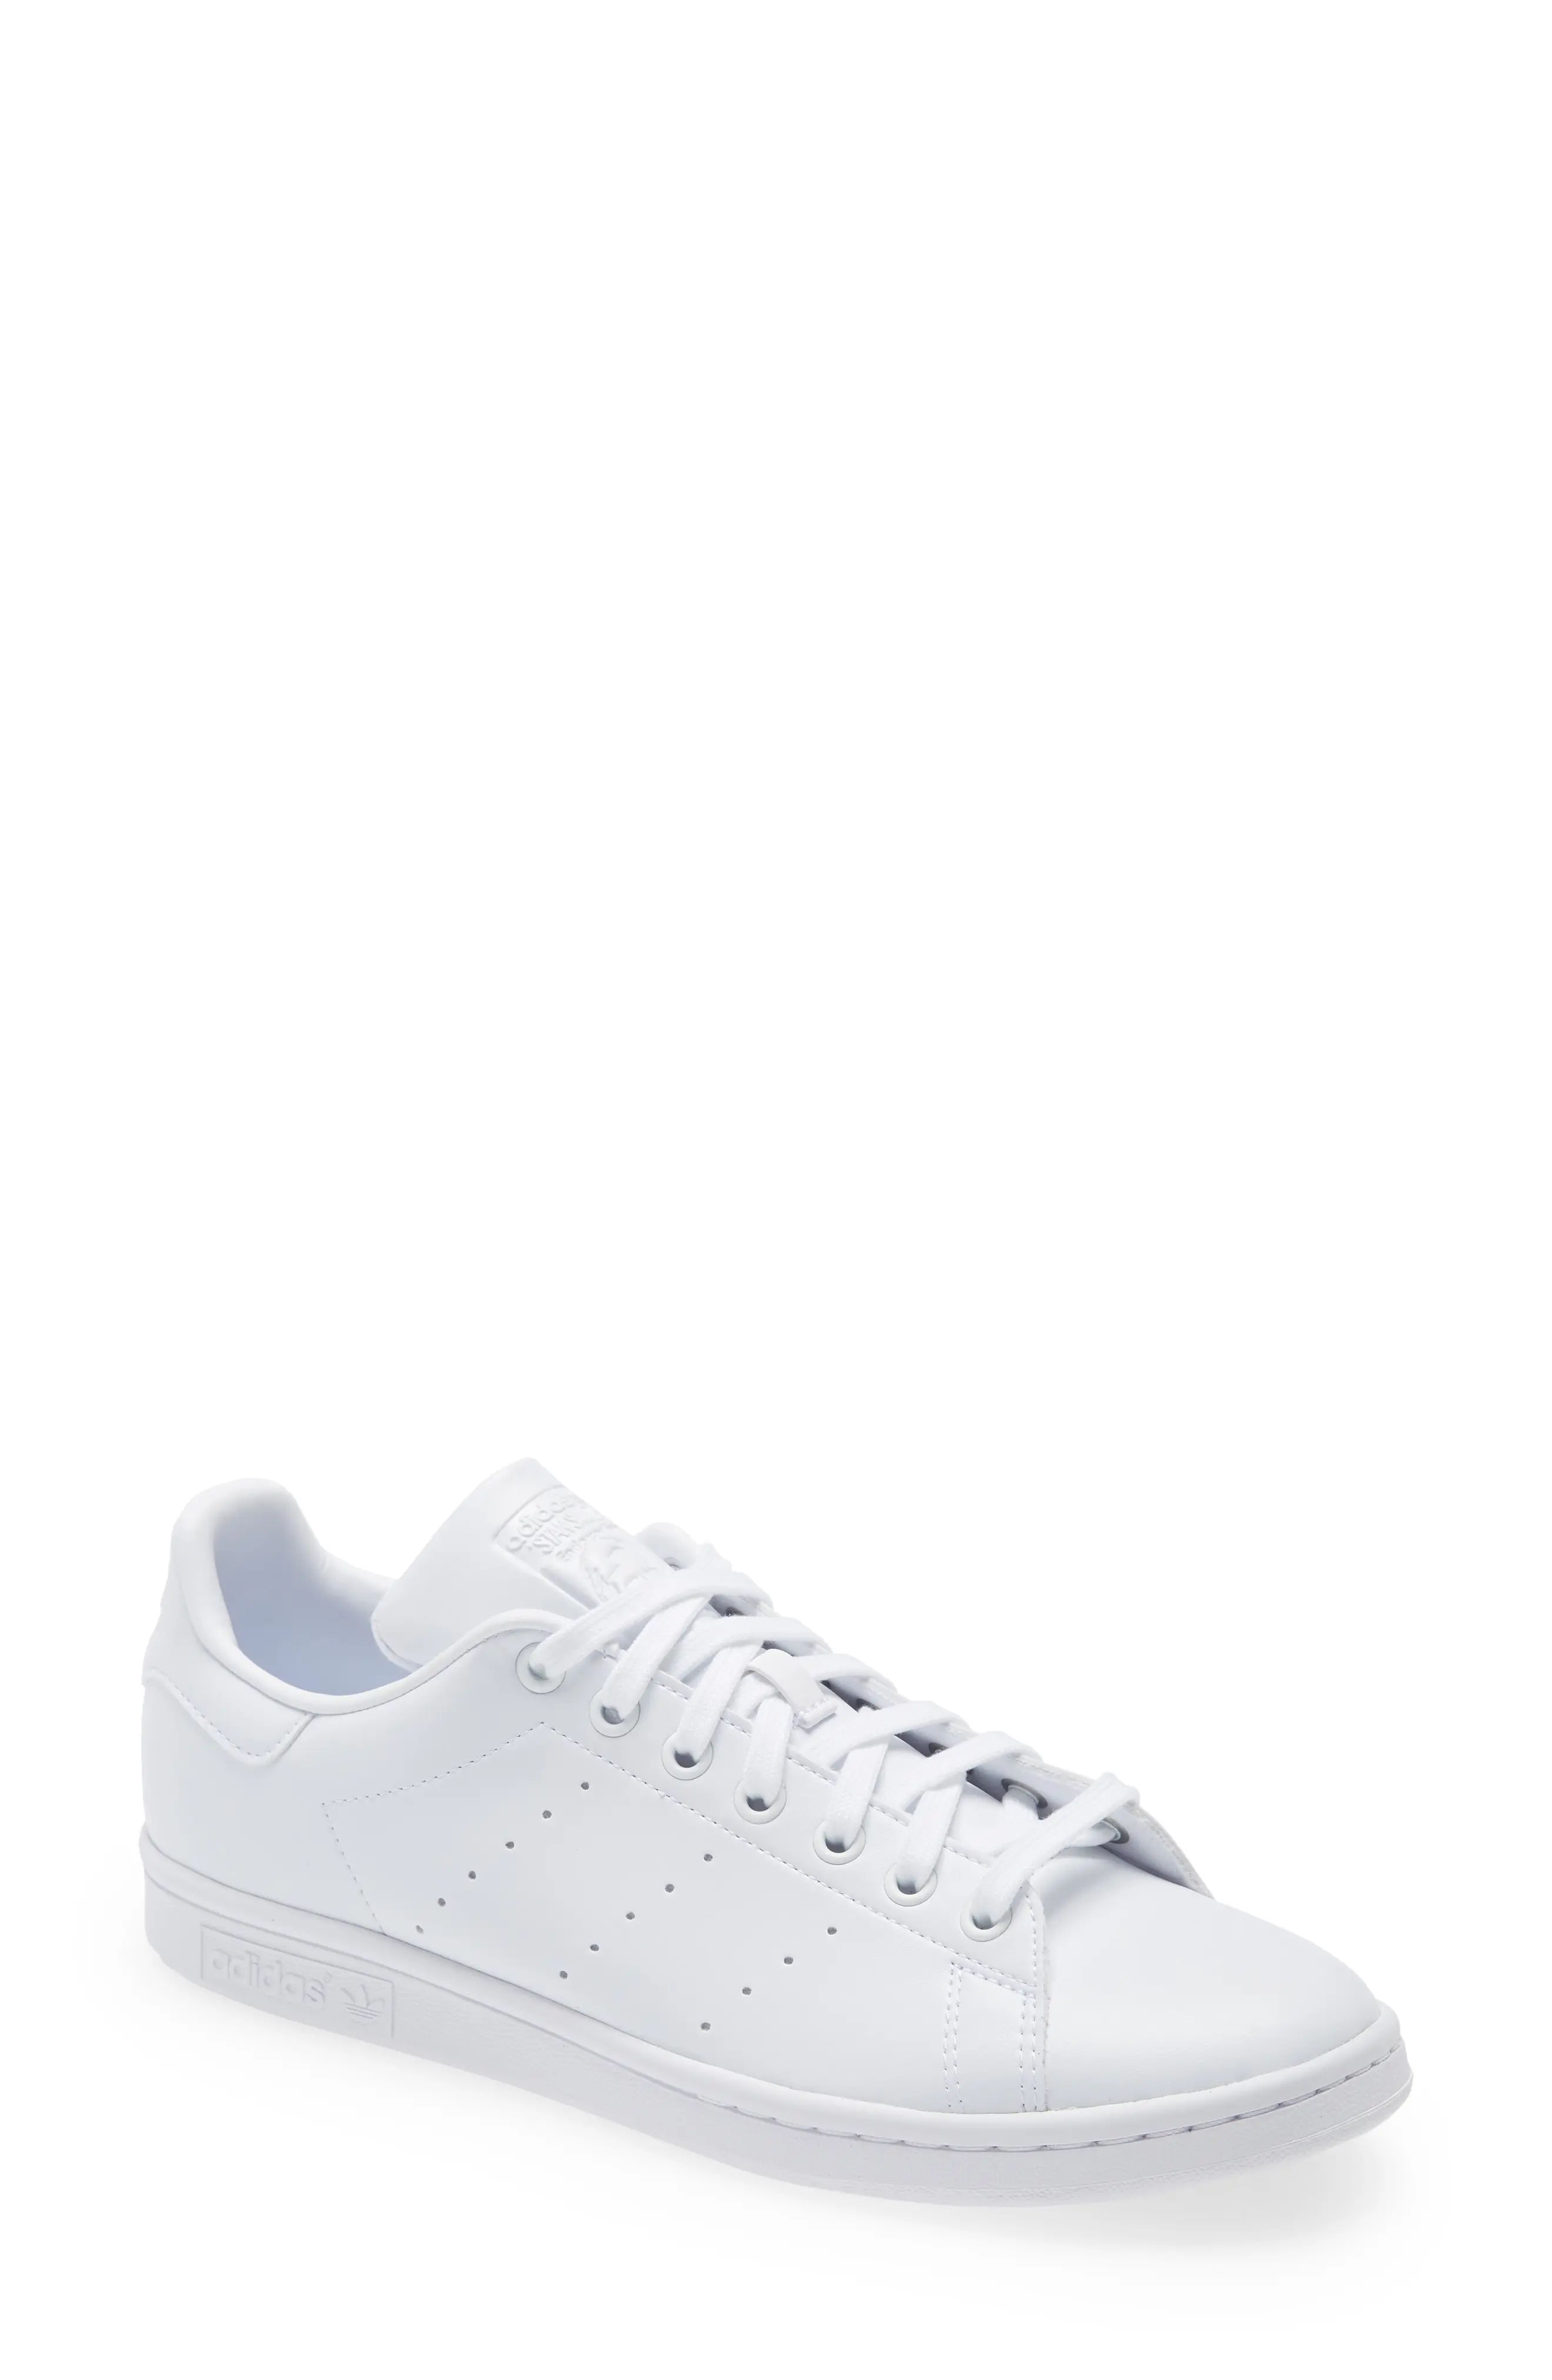 adidas Stan Smith Low Top Sneaker in White/White/Core Black at Nordstrom, Size 5.5 | Nordstrom